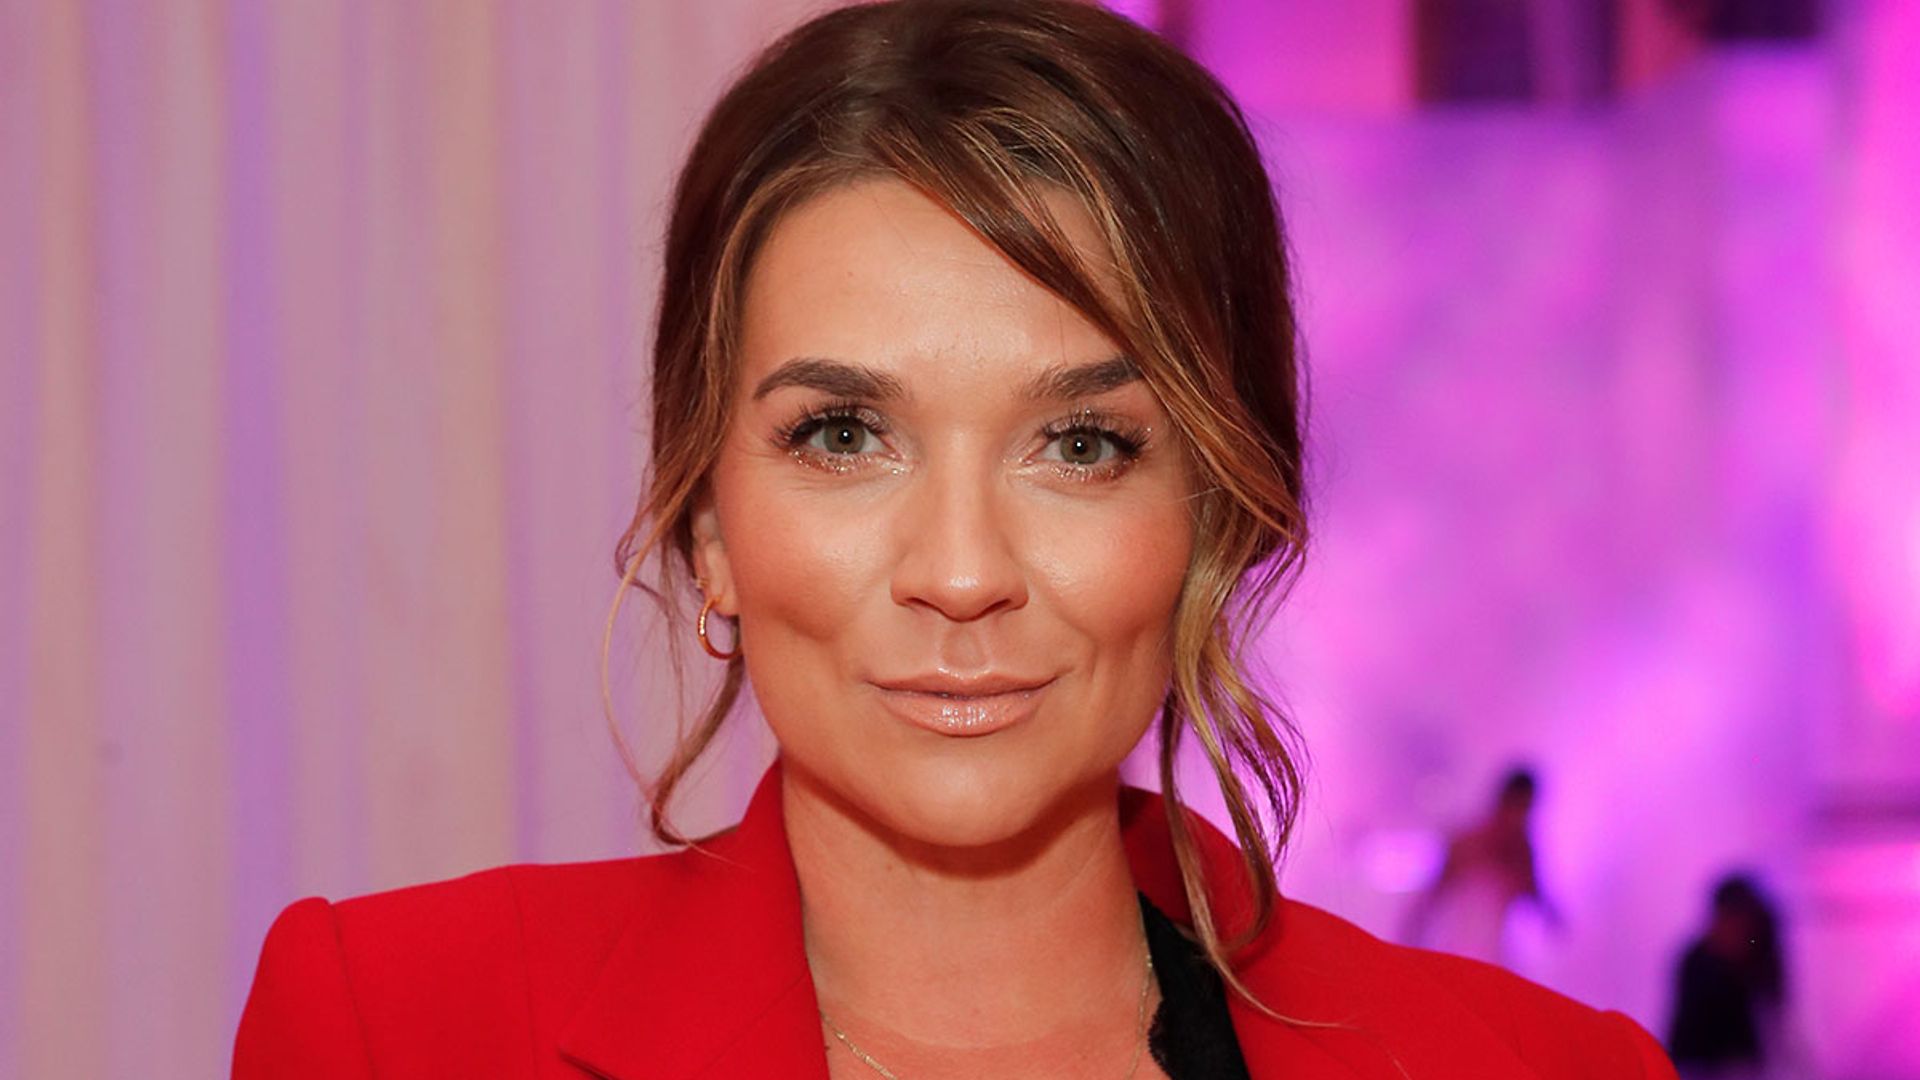 GBBO's Candice Brown talks 'really hard' year and why she's ready for 2021